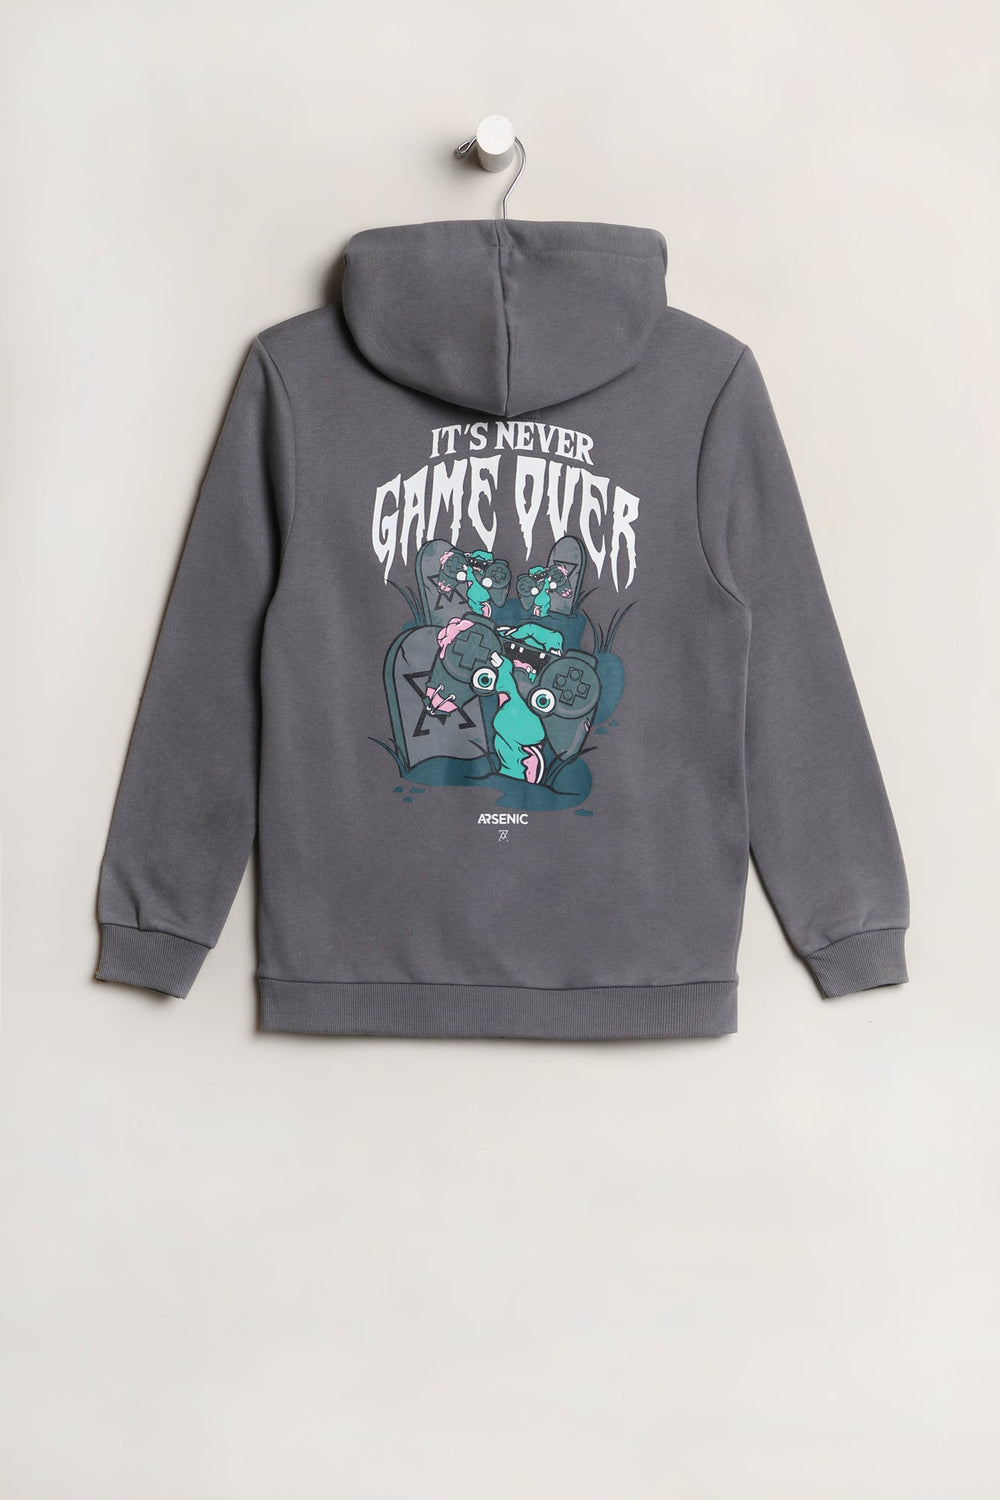 Arsenic Youth It's Never Game Over Hoodie Arsenic Youth It's Never Game Over Hoodie